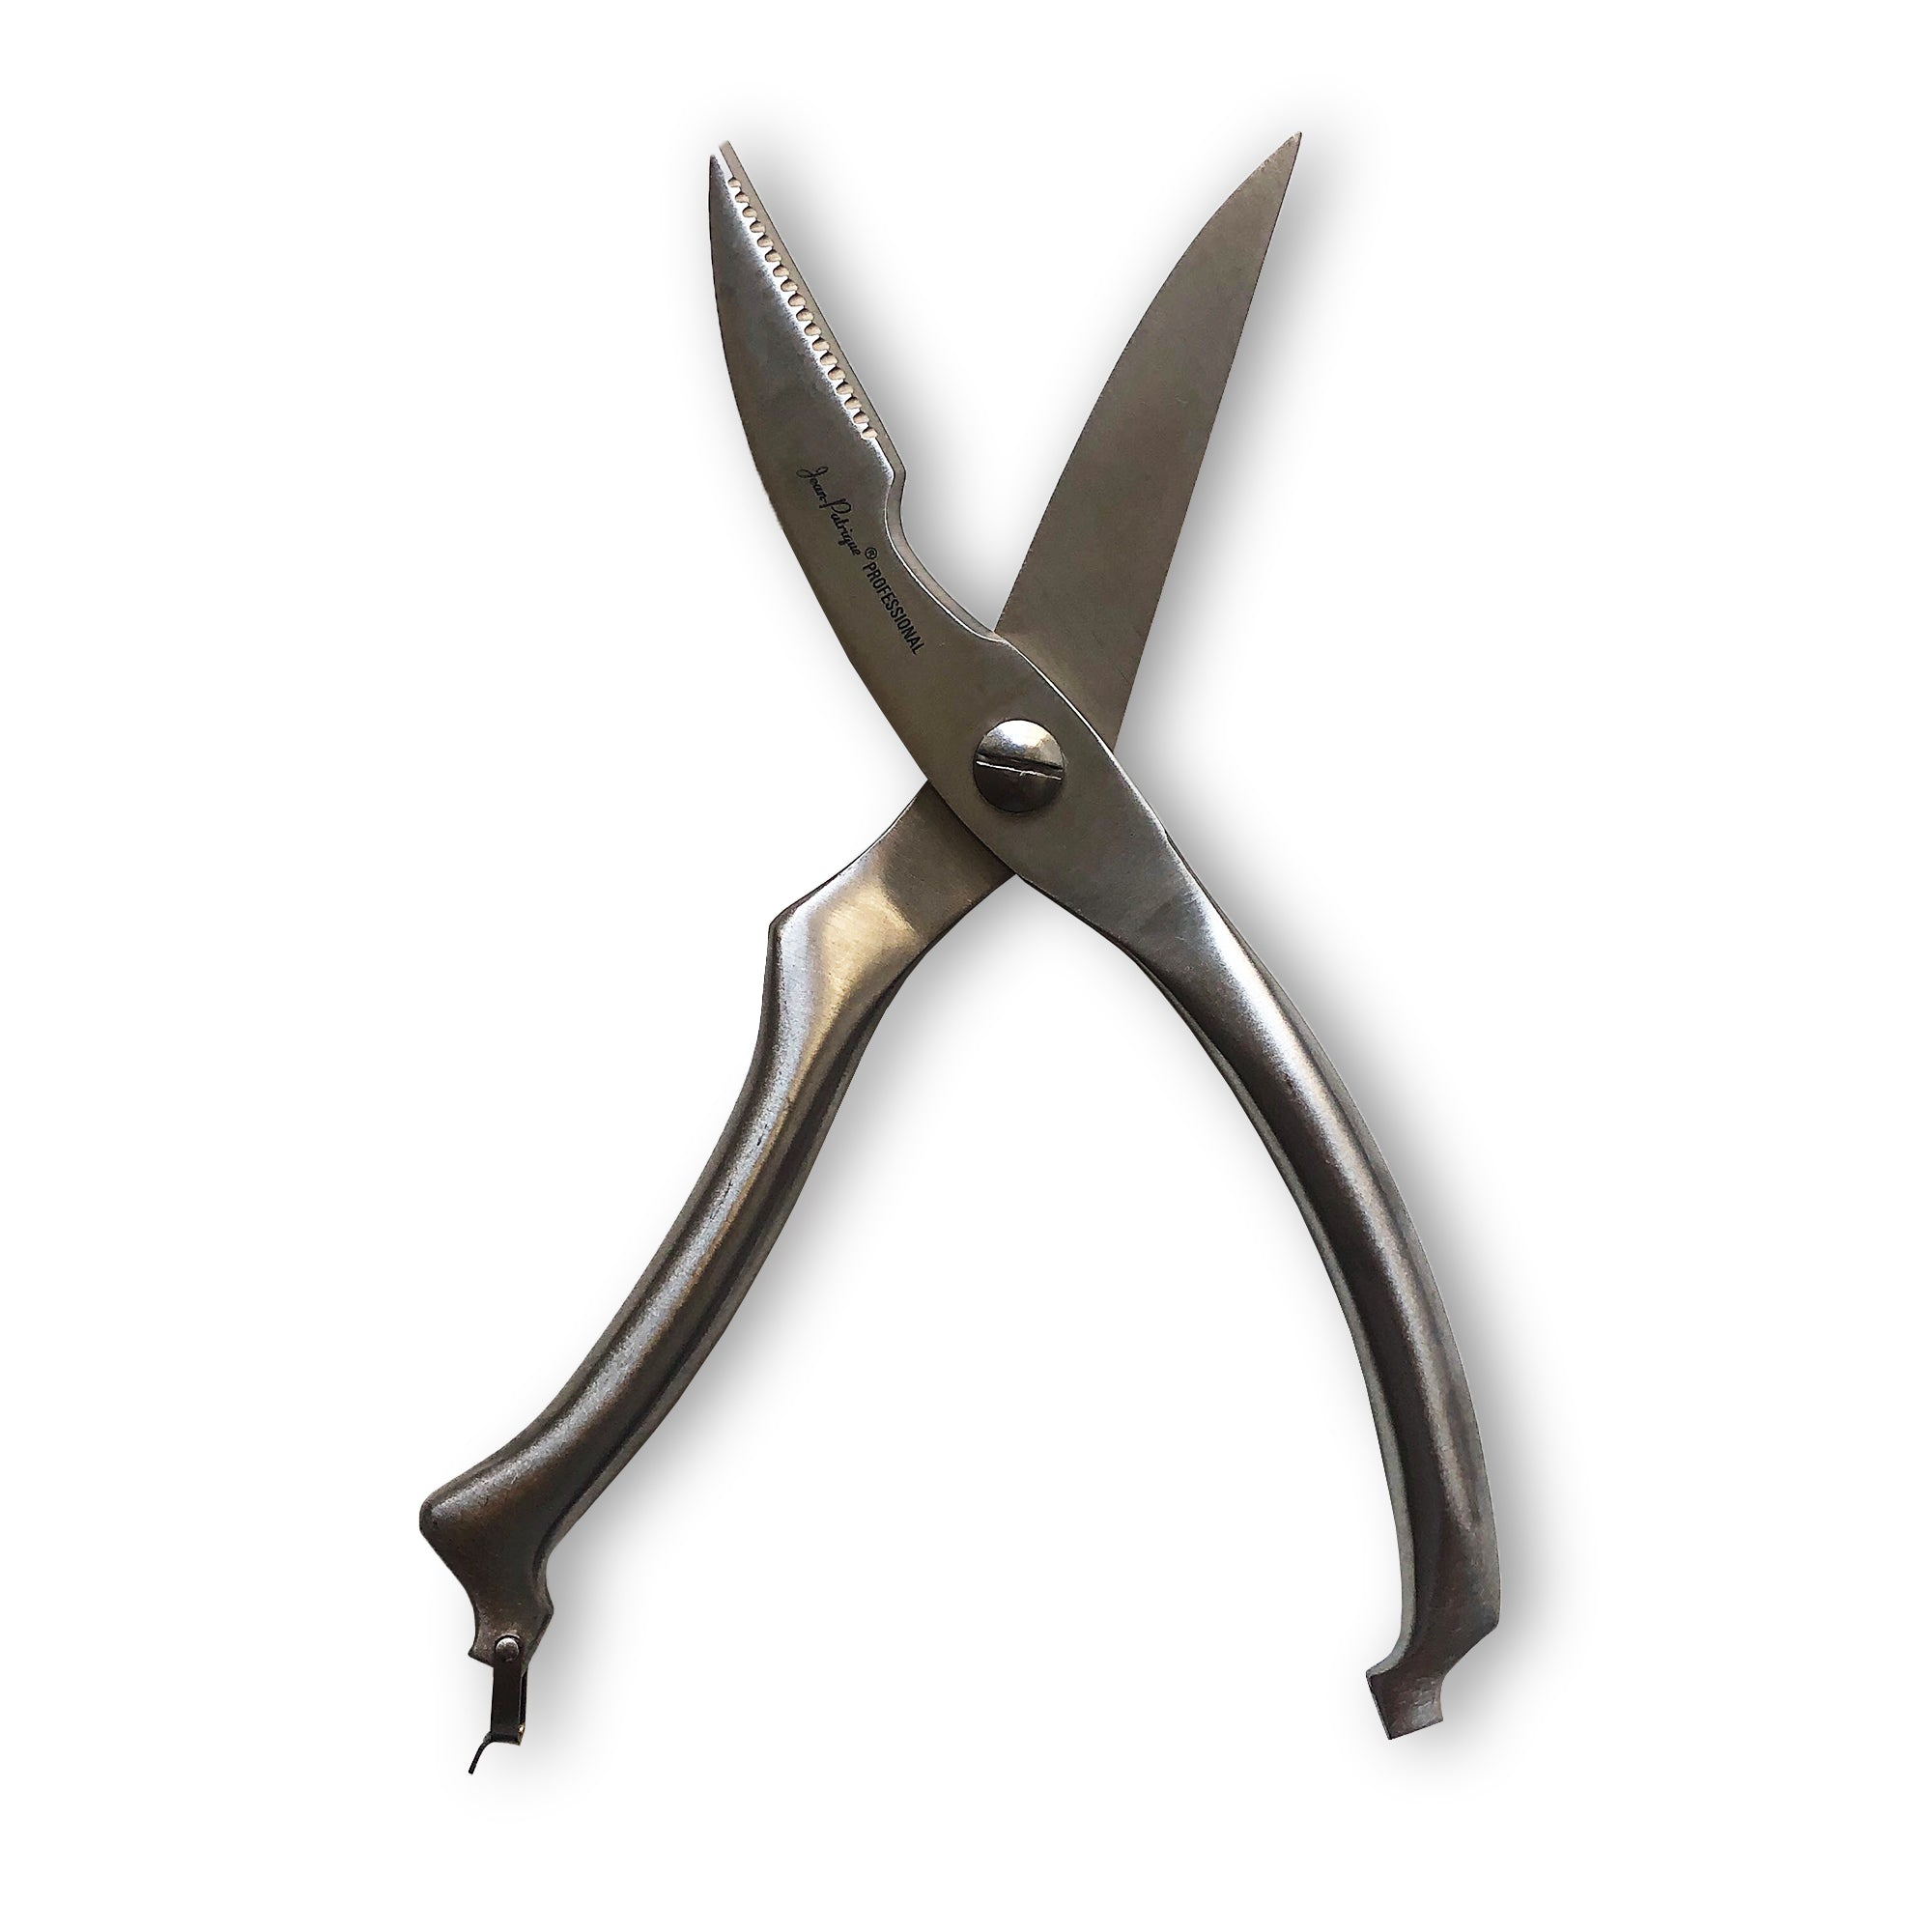 Chopaholic Professional Poultry Shears